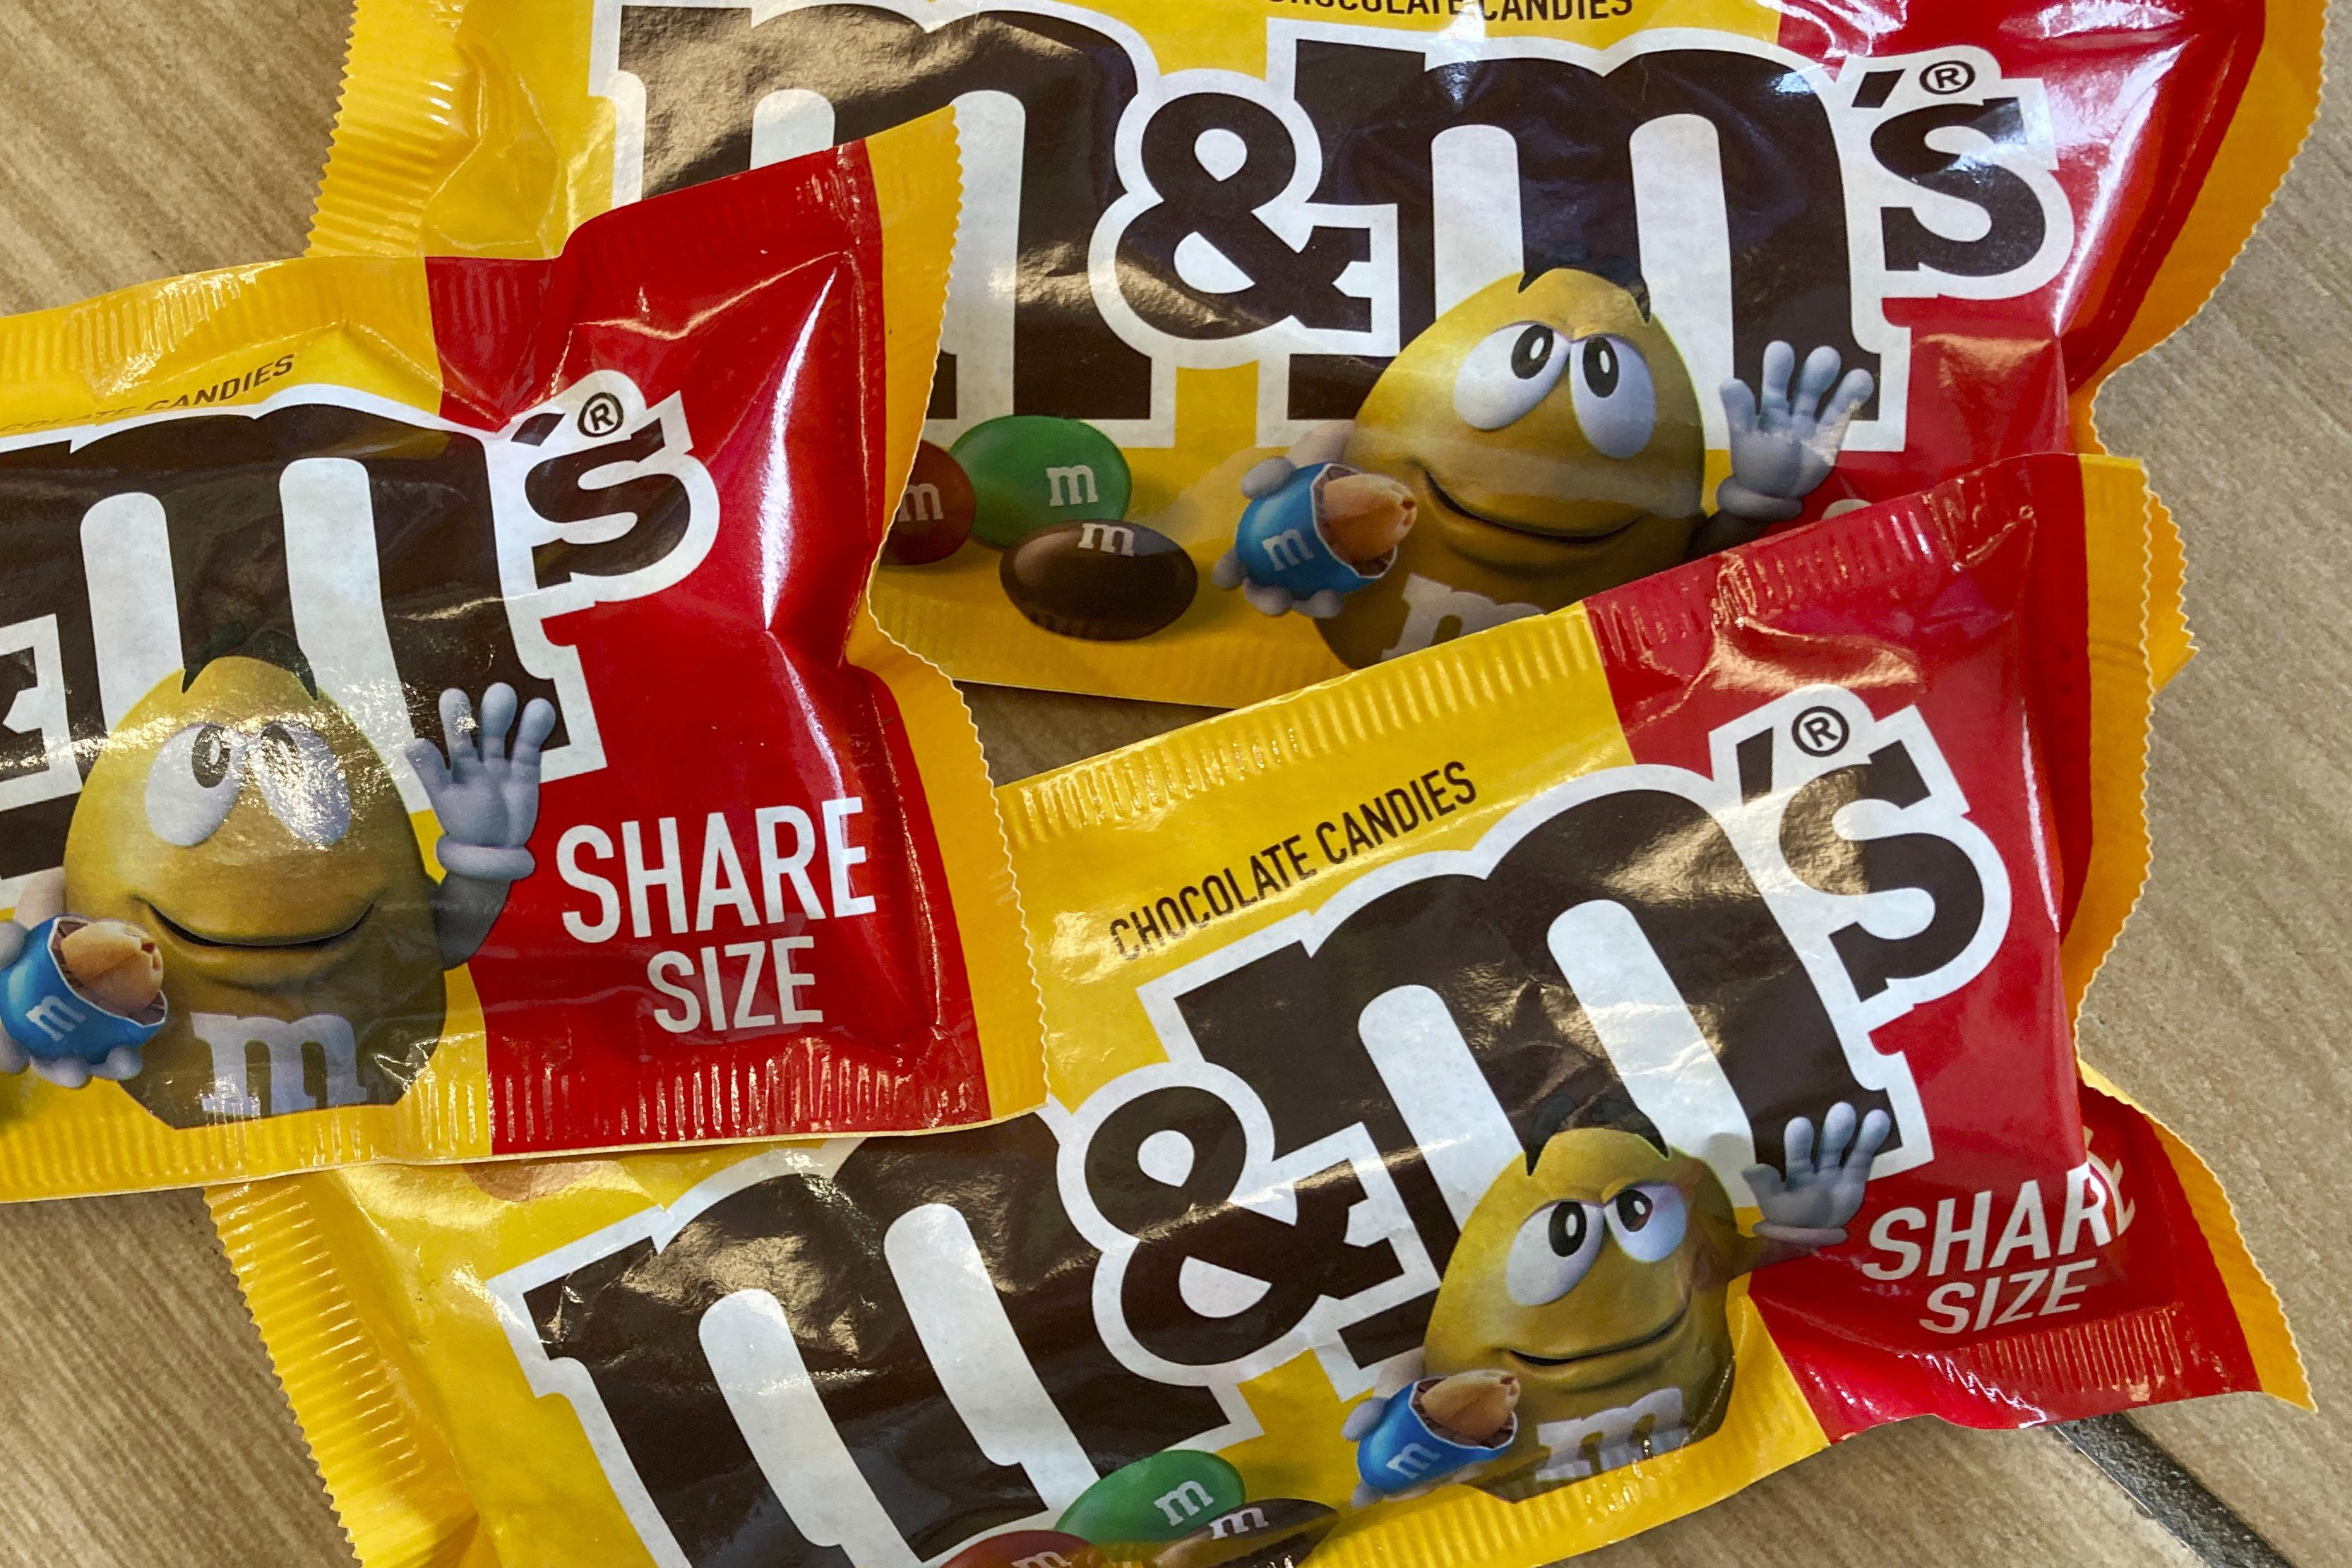 M&M's chocolate-coated pandering provokes ludicrous reaction – The